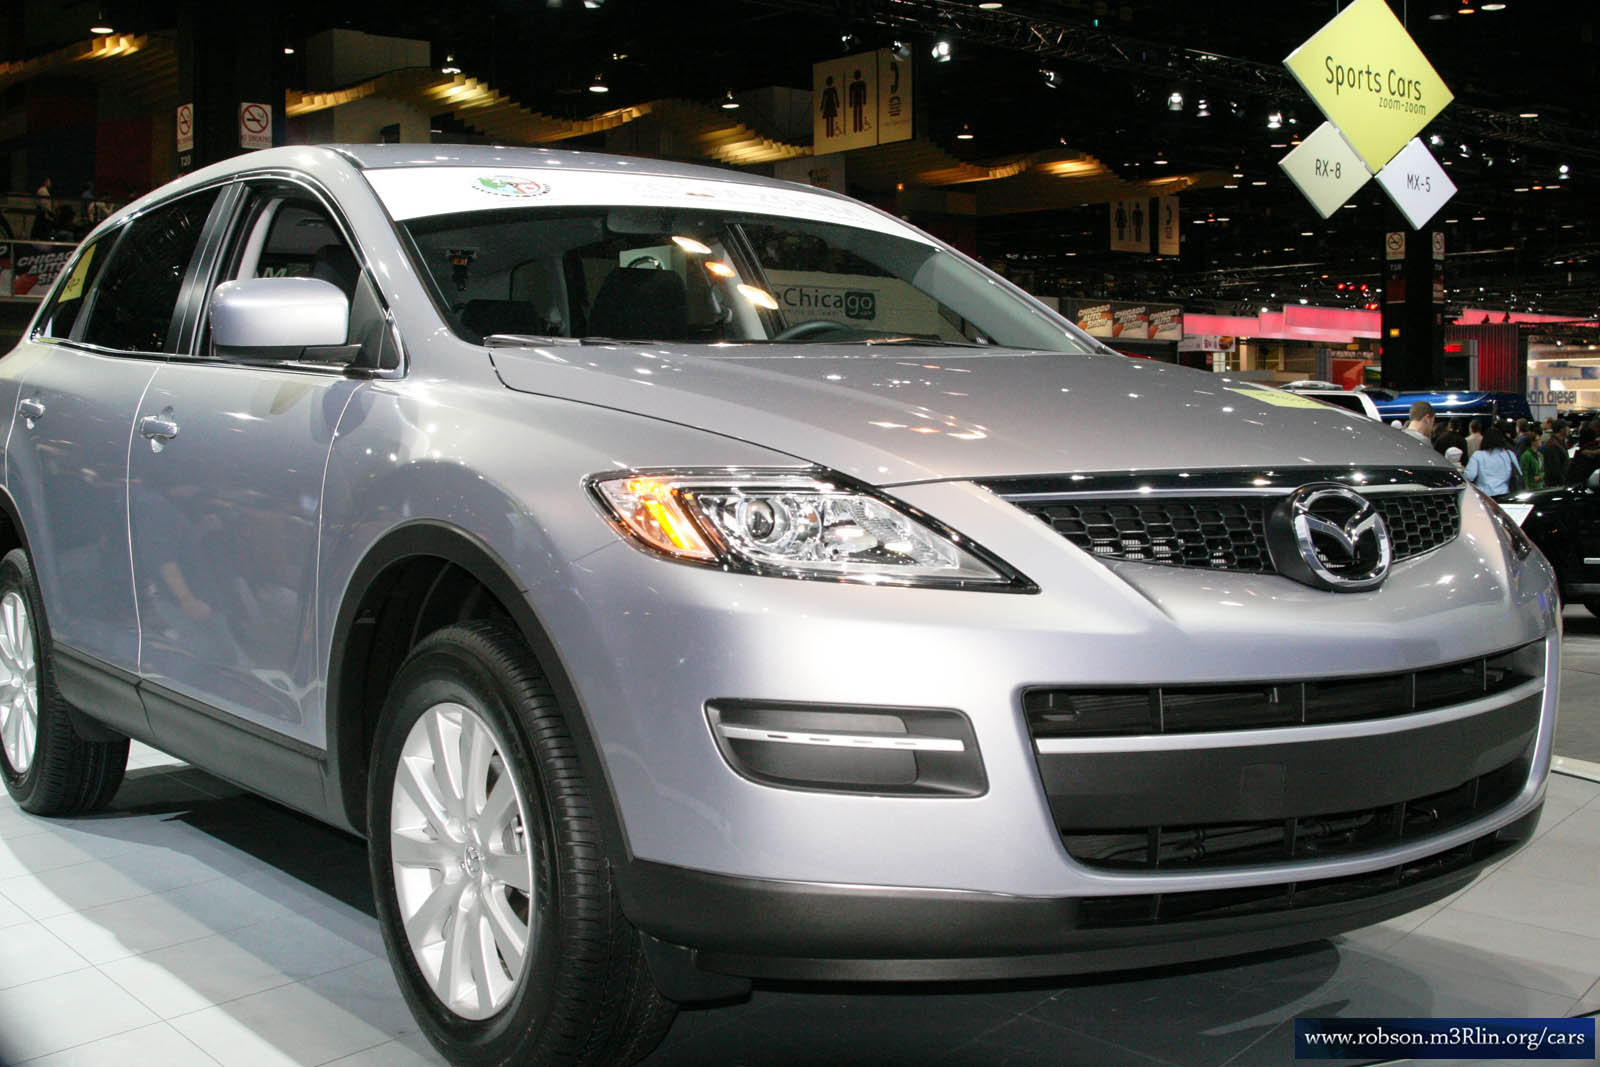 The 2008 Mazda CX-9 then won the